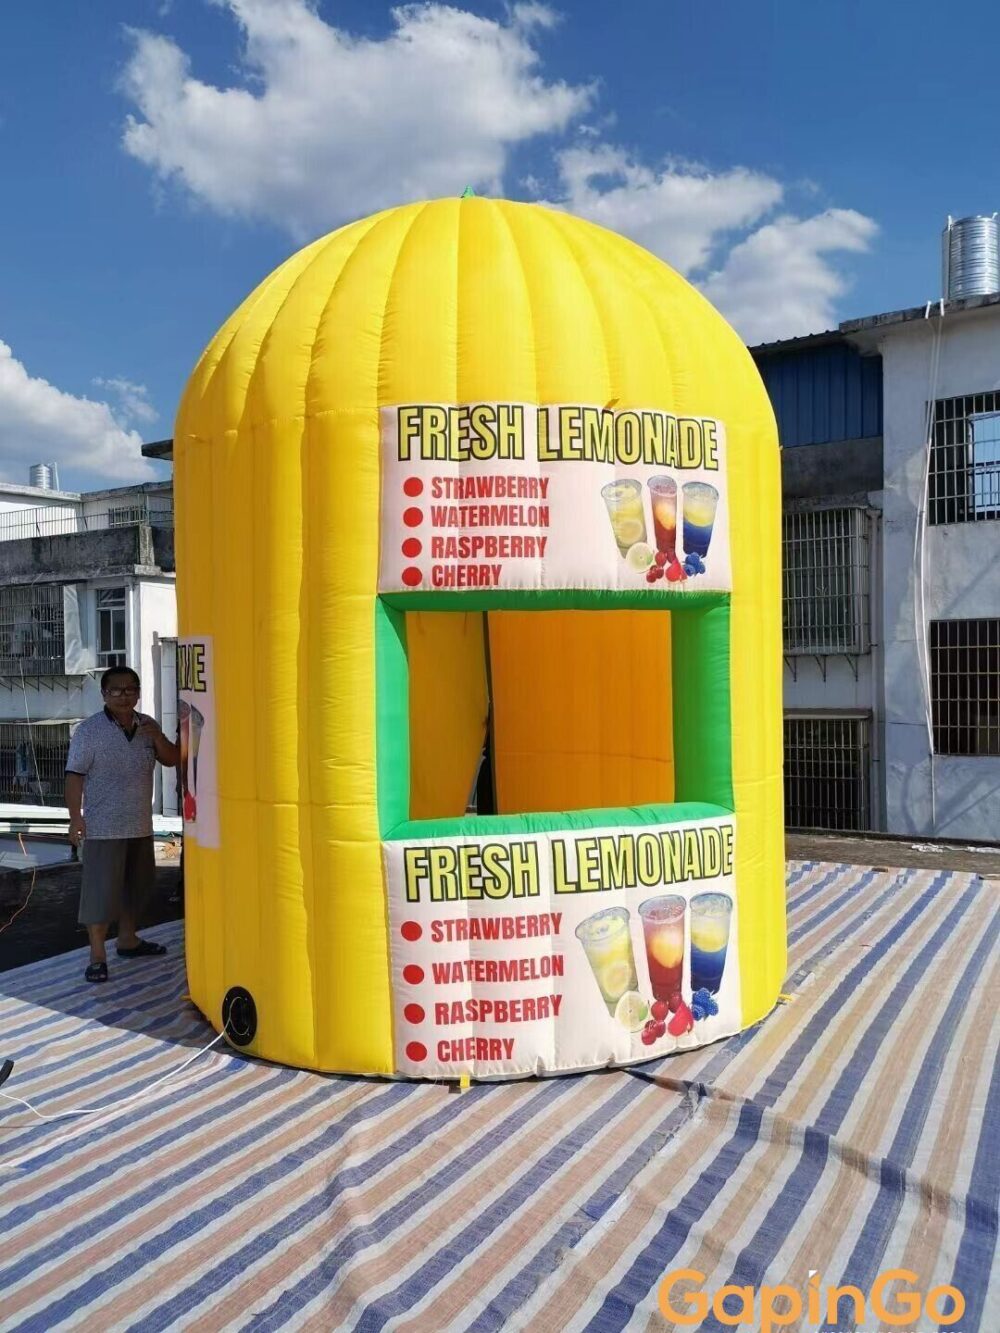 Elevate your outdoor retail experience with our Inflatable Portable Shop Beverage Stall. This boutique-style air-blown structure is designed for convenience and mobility. Set up shop anywhere and attract customers with this eye-catching and unique solution. The included air blower ensures quick and easy inflation, making it an ideal choice for on-the-go businesses, events, and pop-up shops. Stand out and make a statement with this portable and stylish beverage stall.